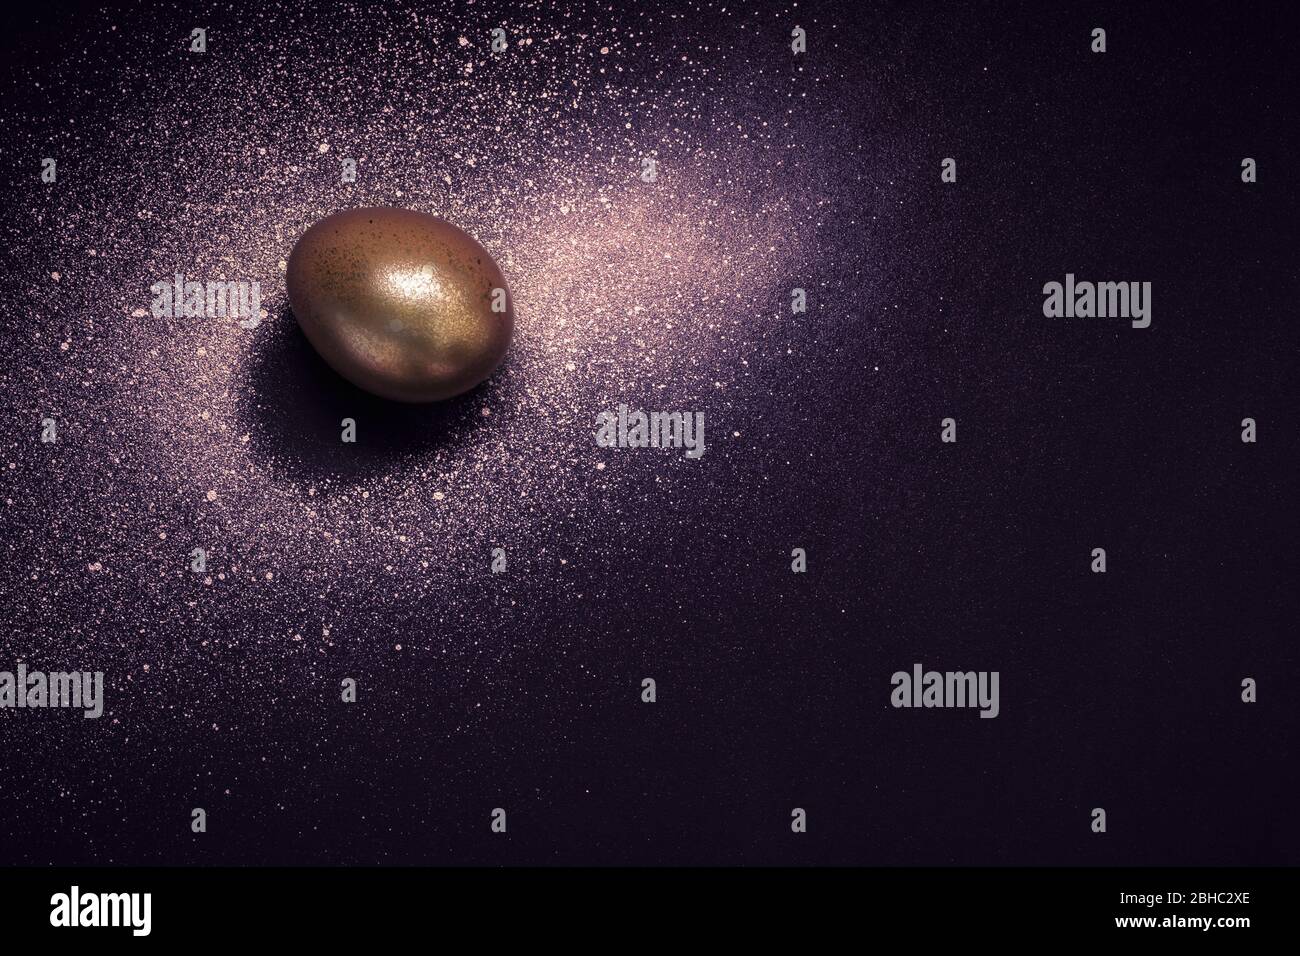 Golden Egg And Paint Spray Galaxy On Purple Background Abstract